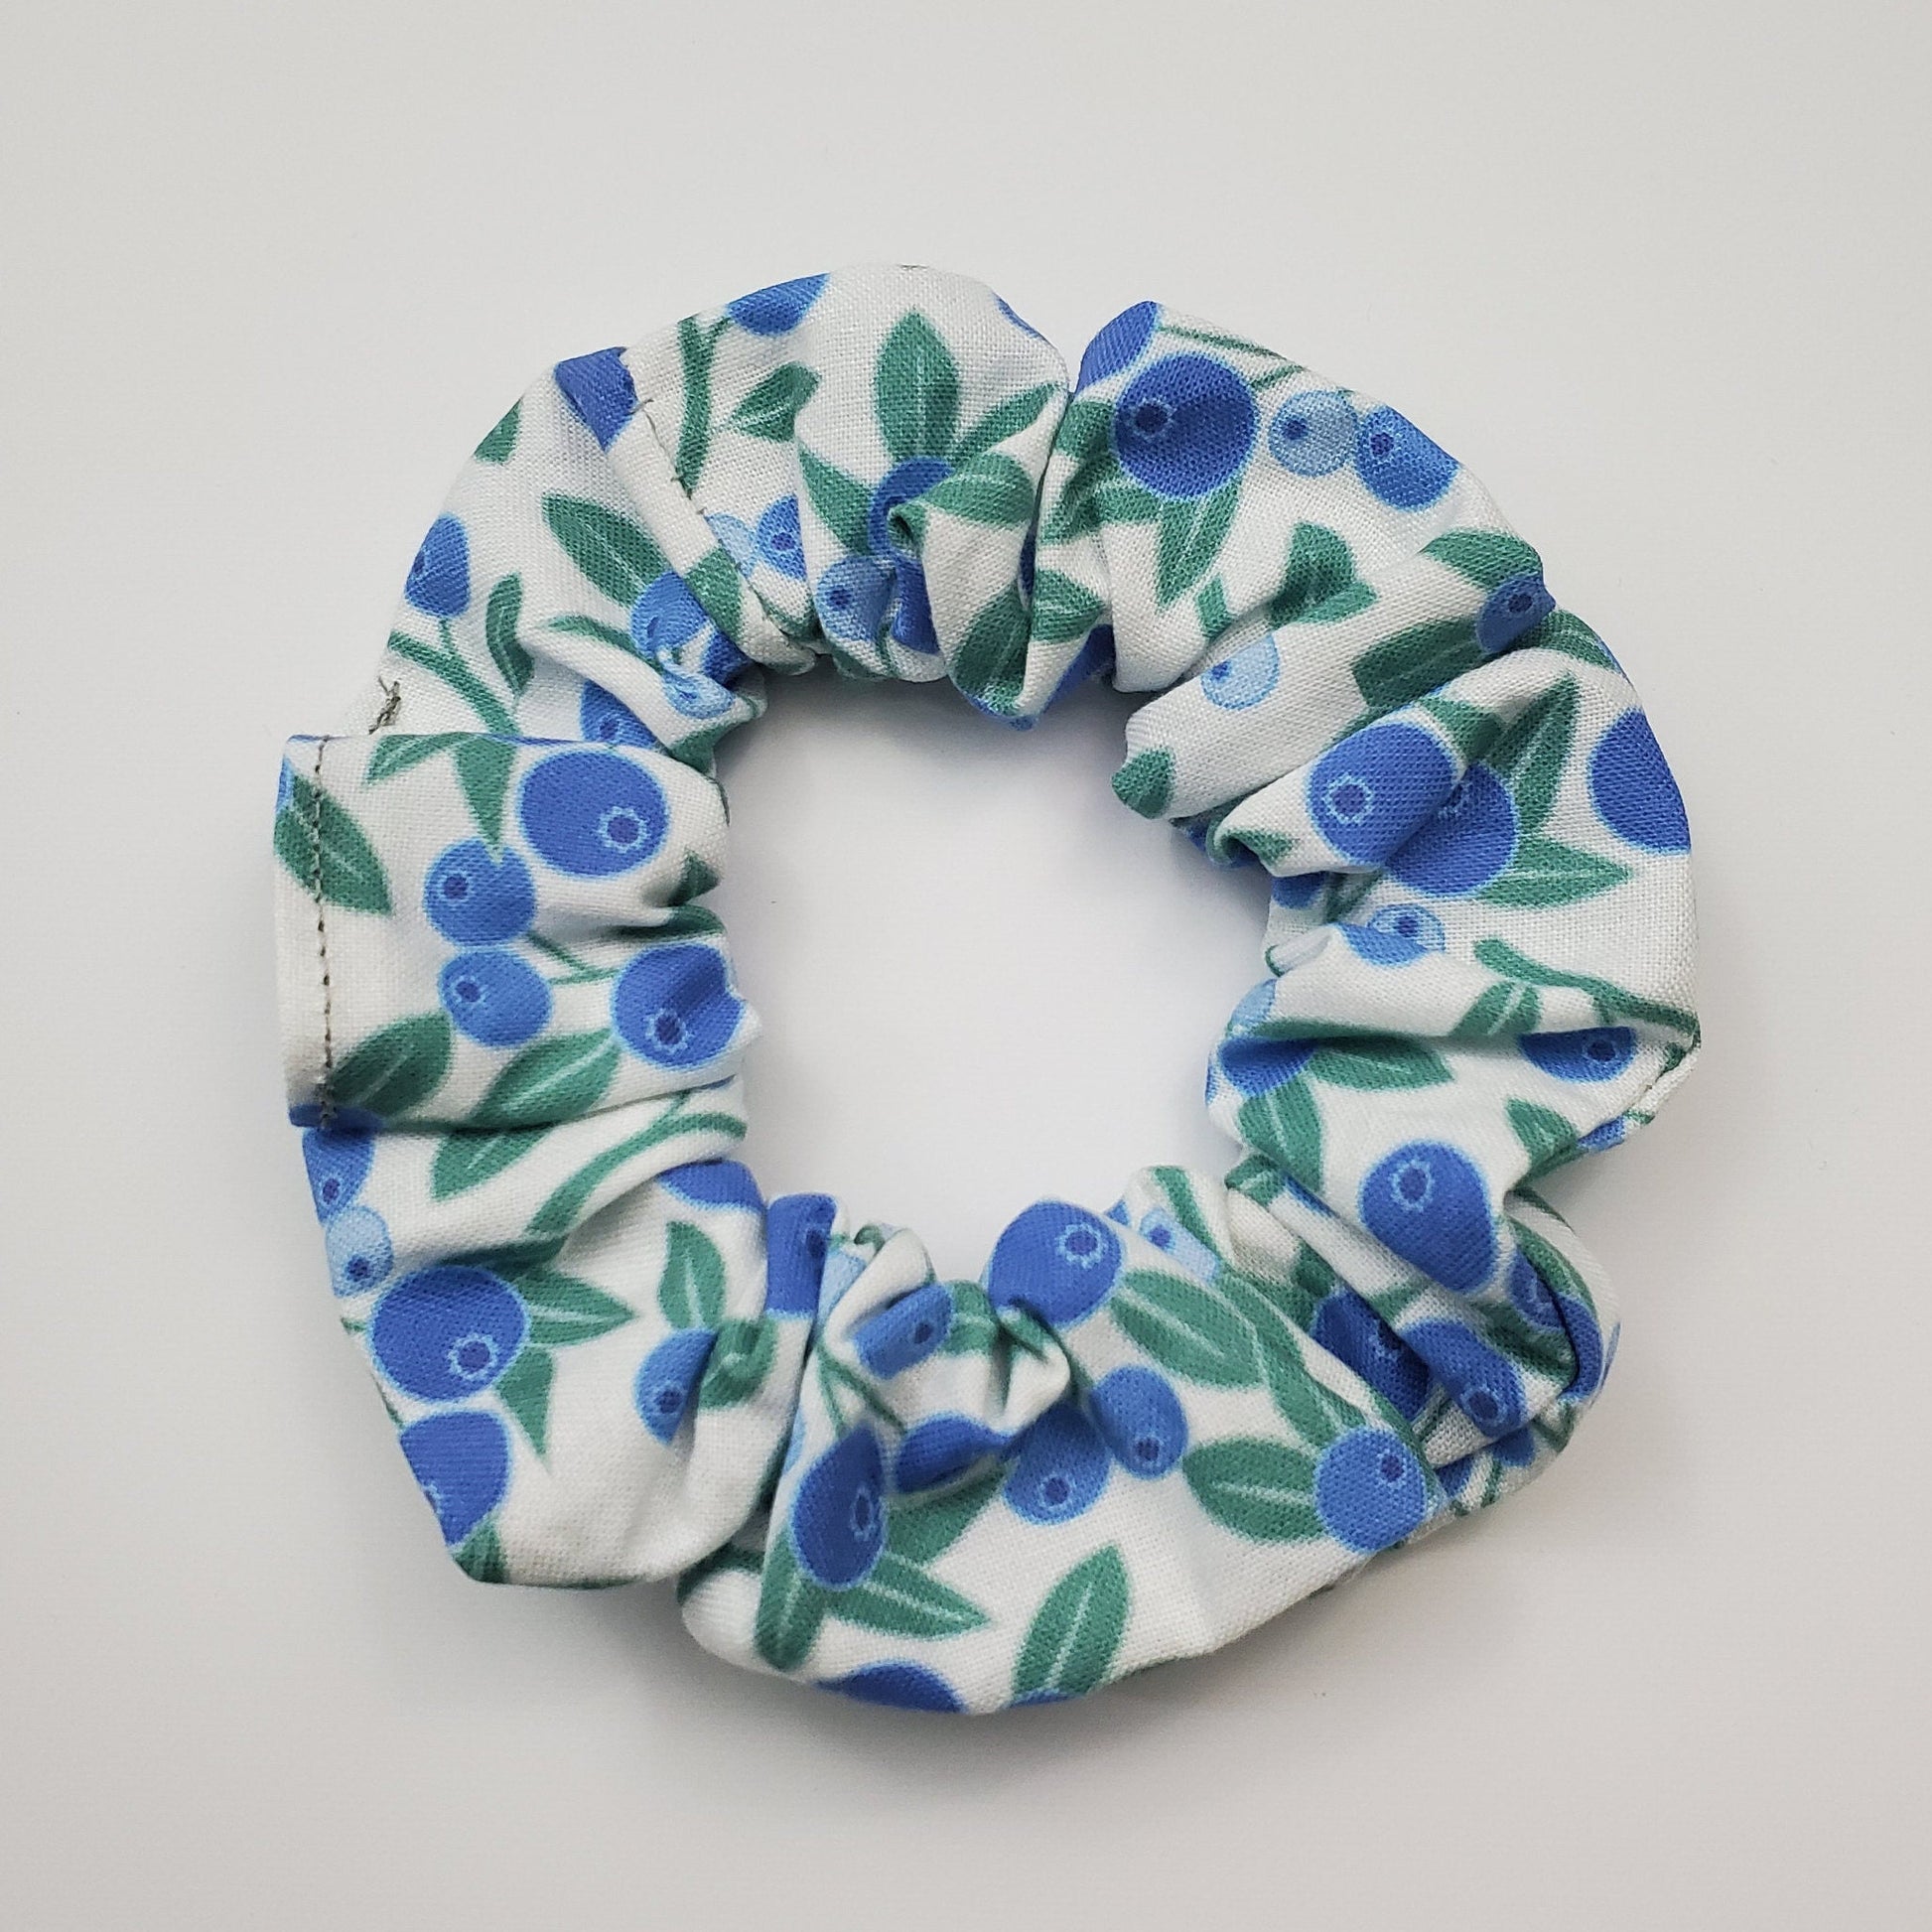 Blueberry print scrunchie - a white background fabric with solid color dark and light blue blueberries and green leaves.